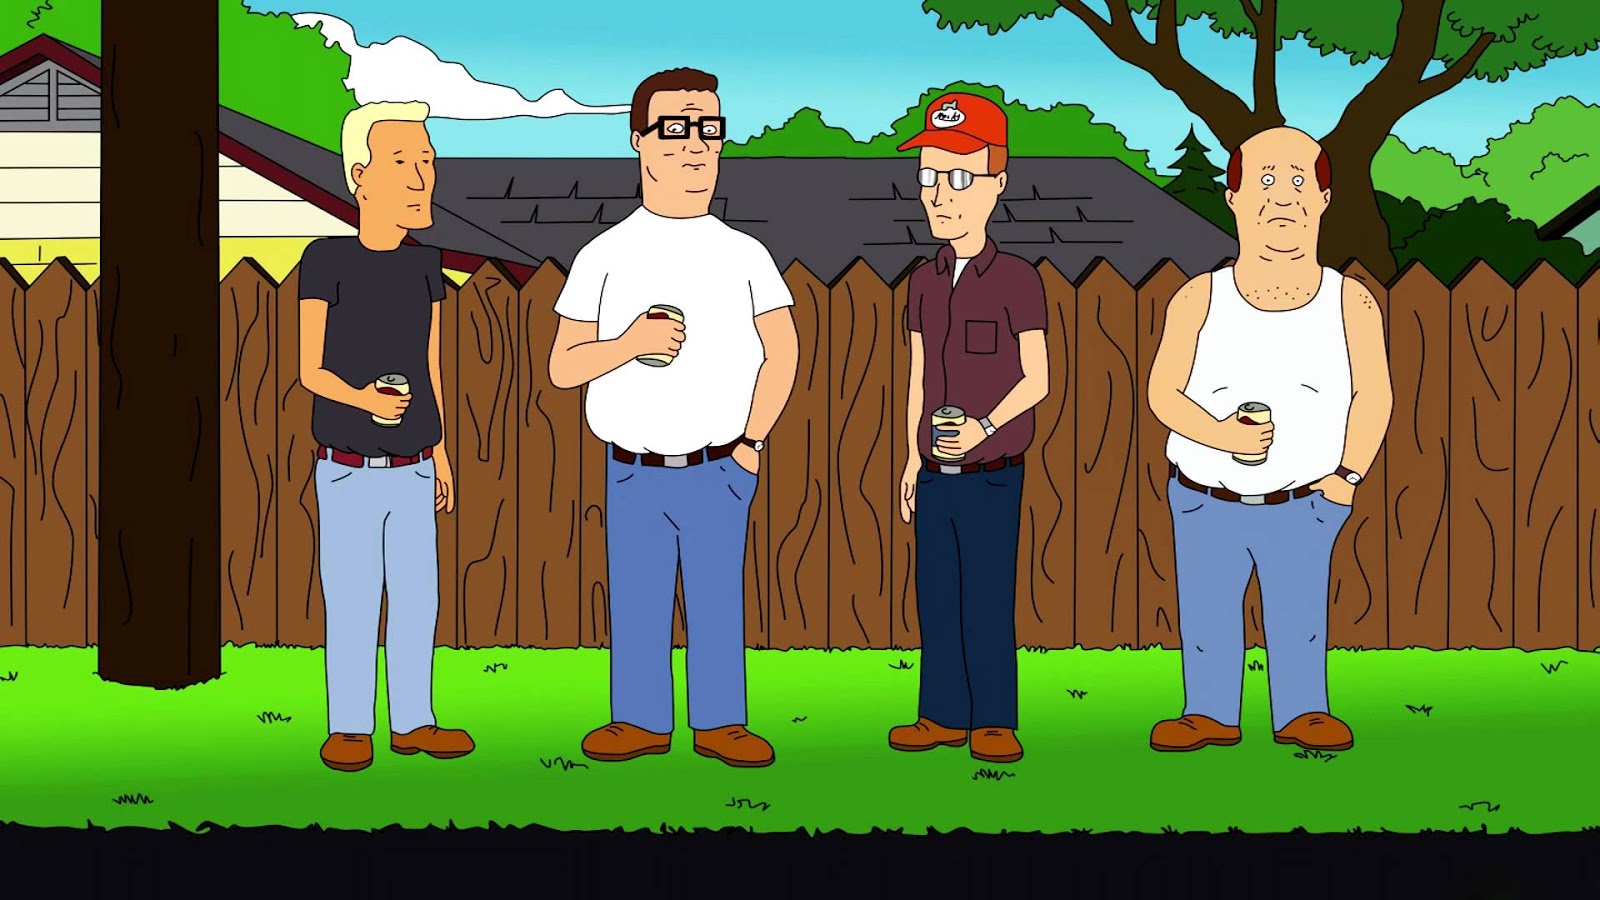 How 'King of the Hill' shaped the future of Comedies on TV